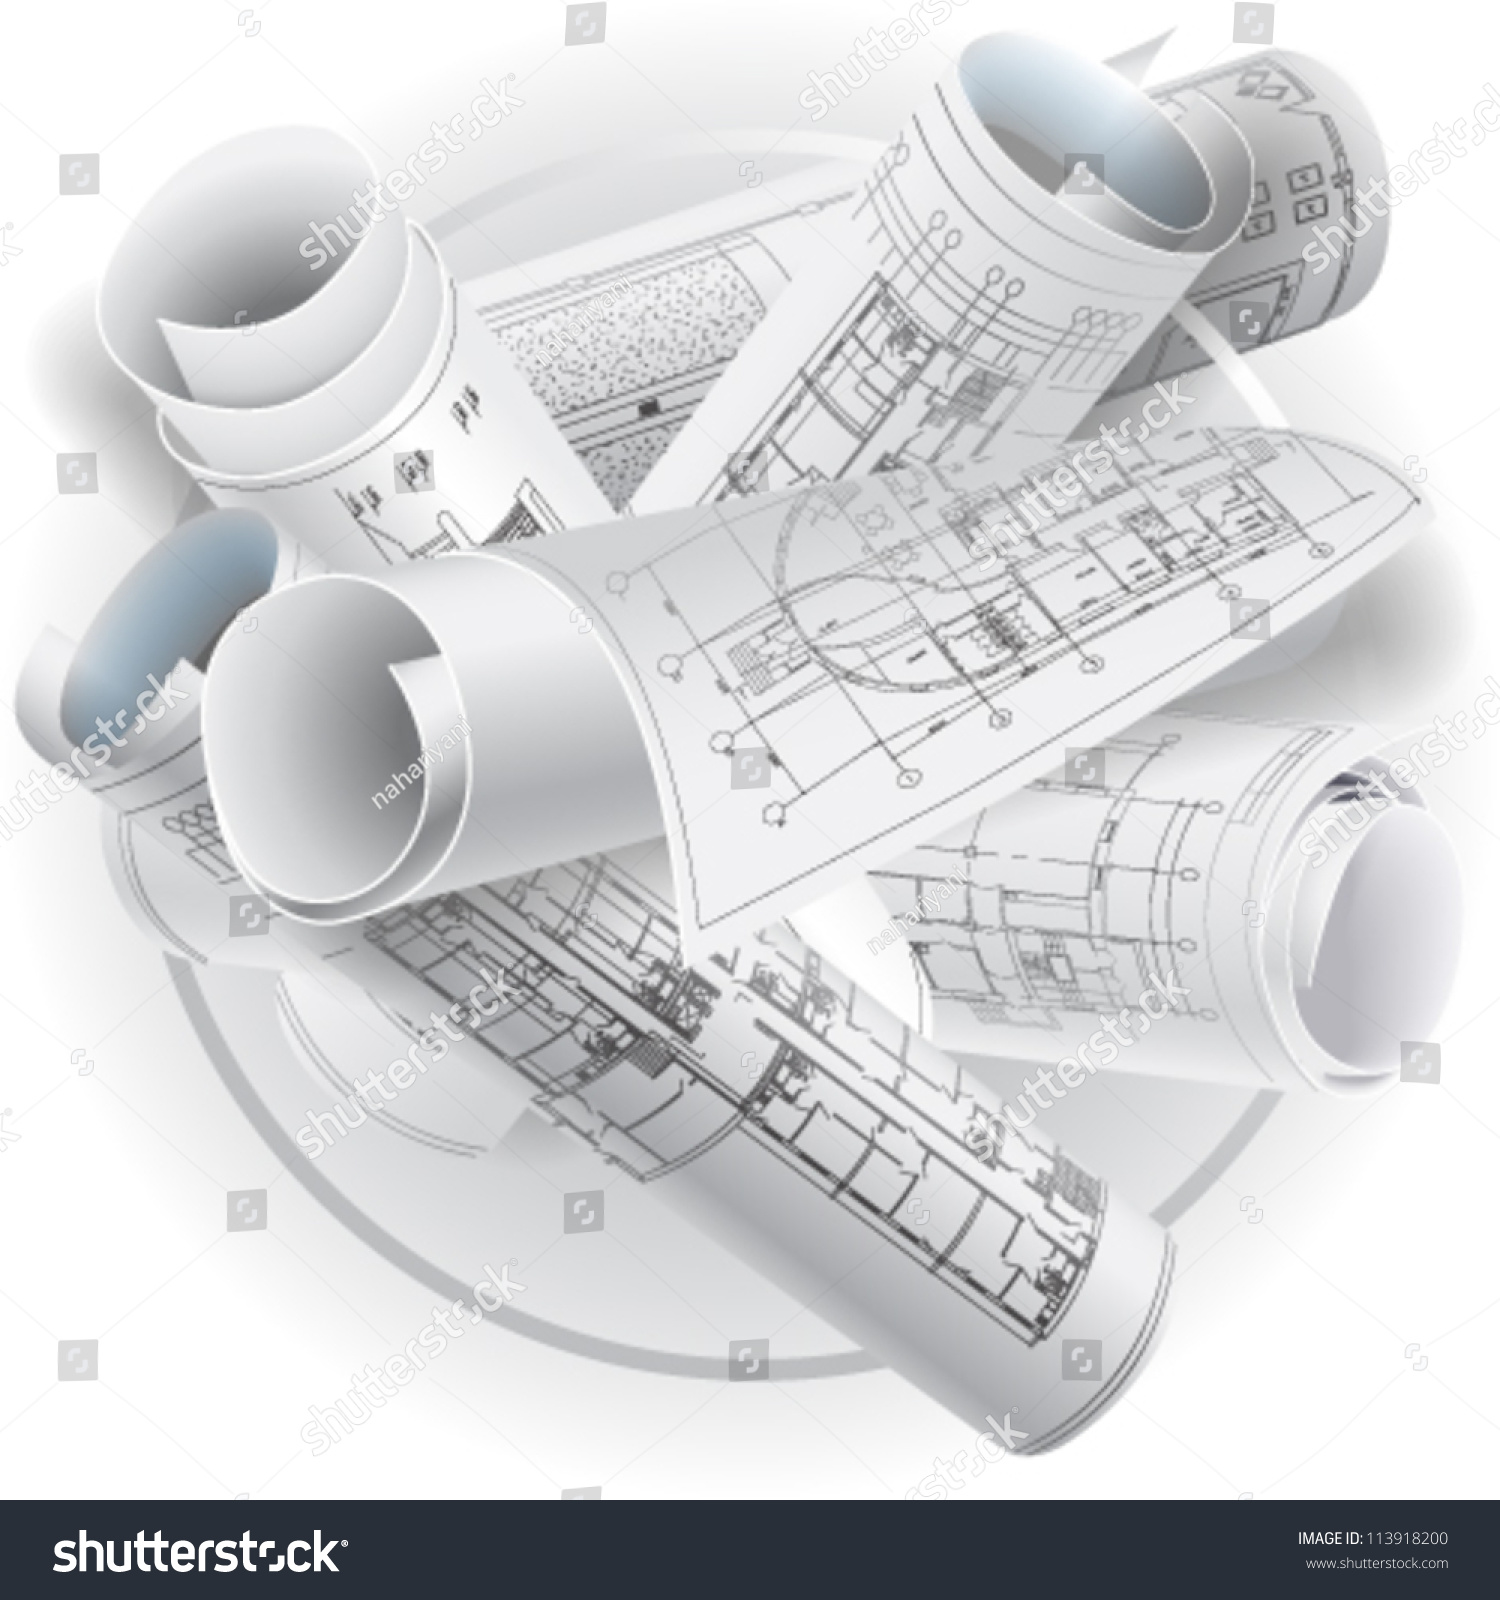 clipart engineering drawings - photo #34